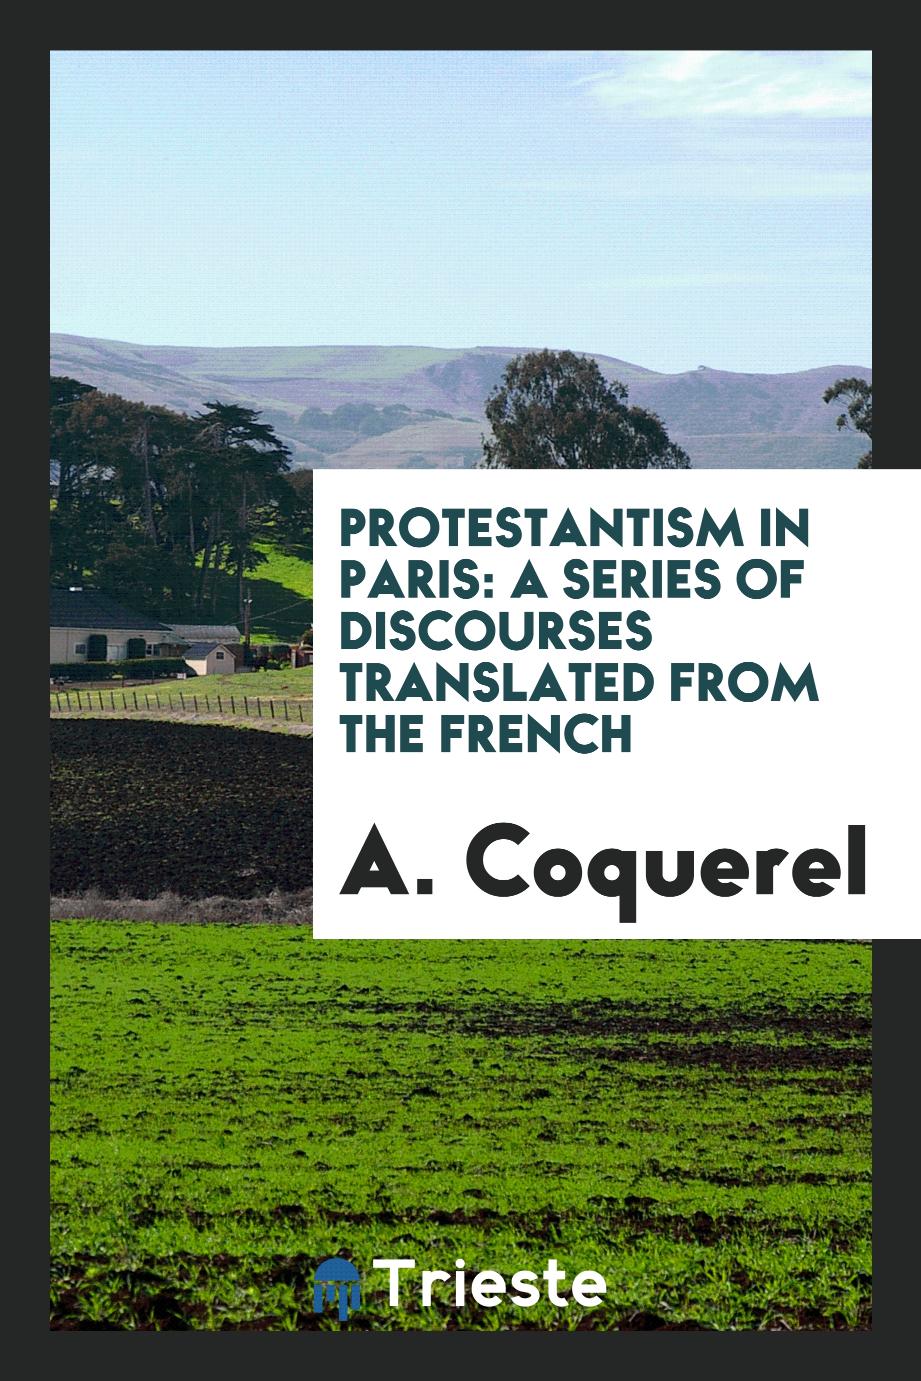 Protestantism in Paris: A Series of Discourses Translated from the French